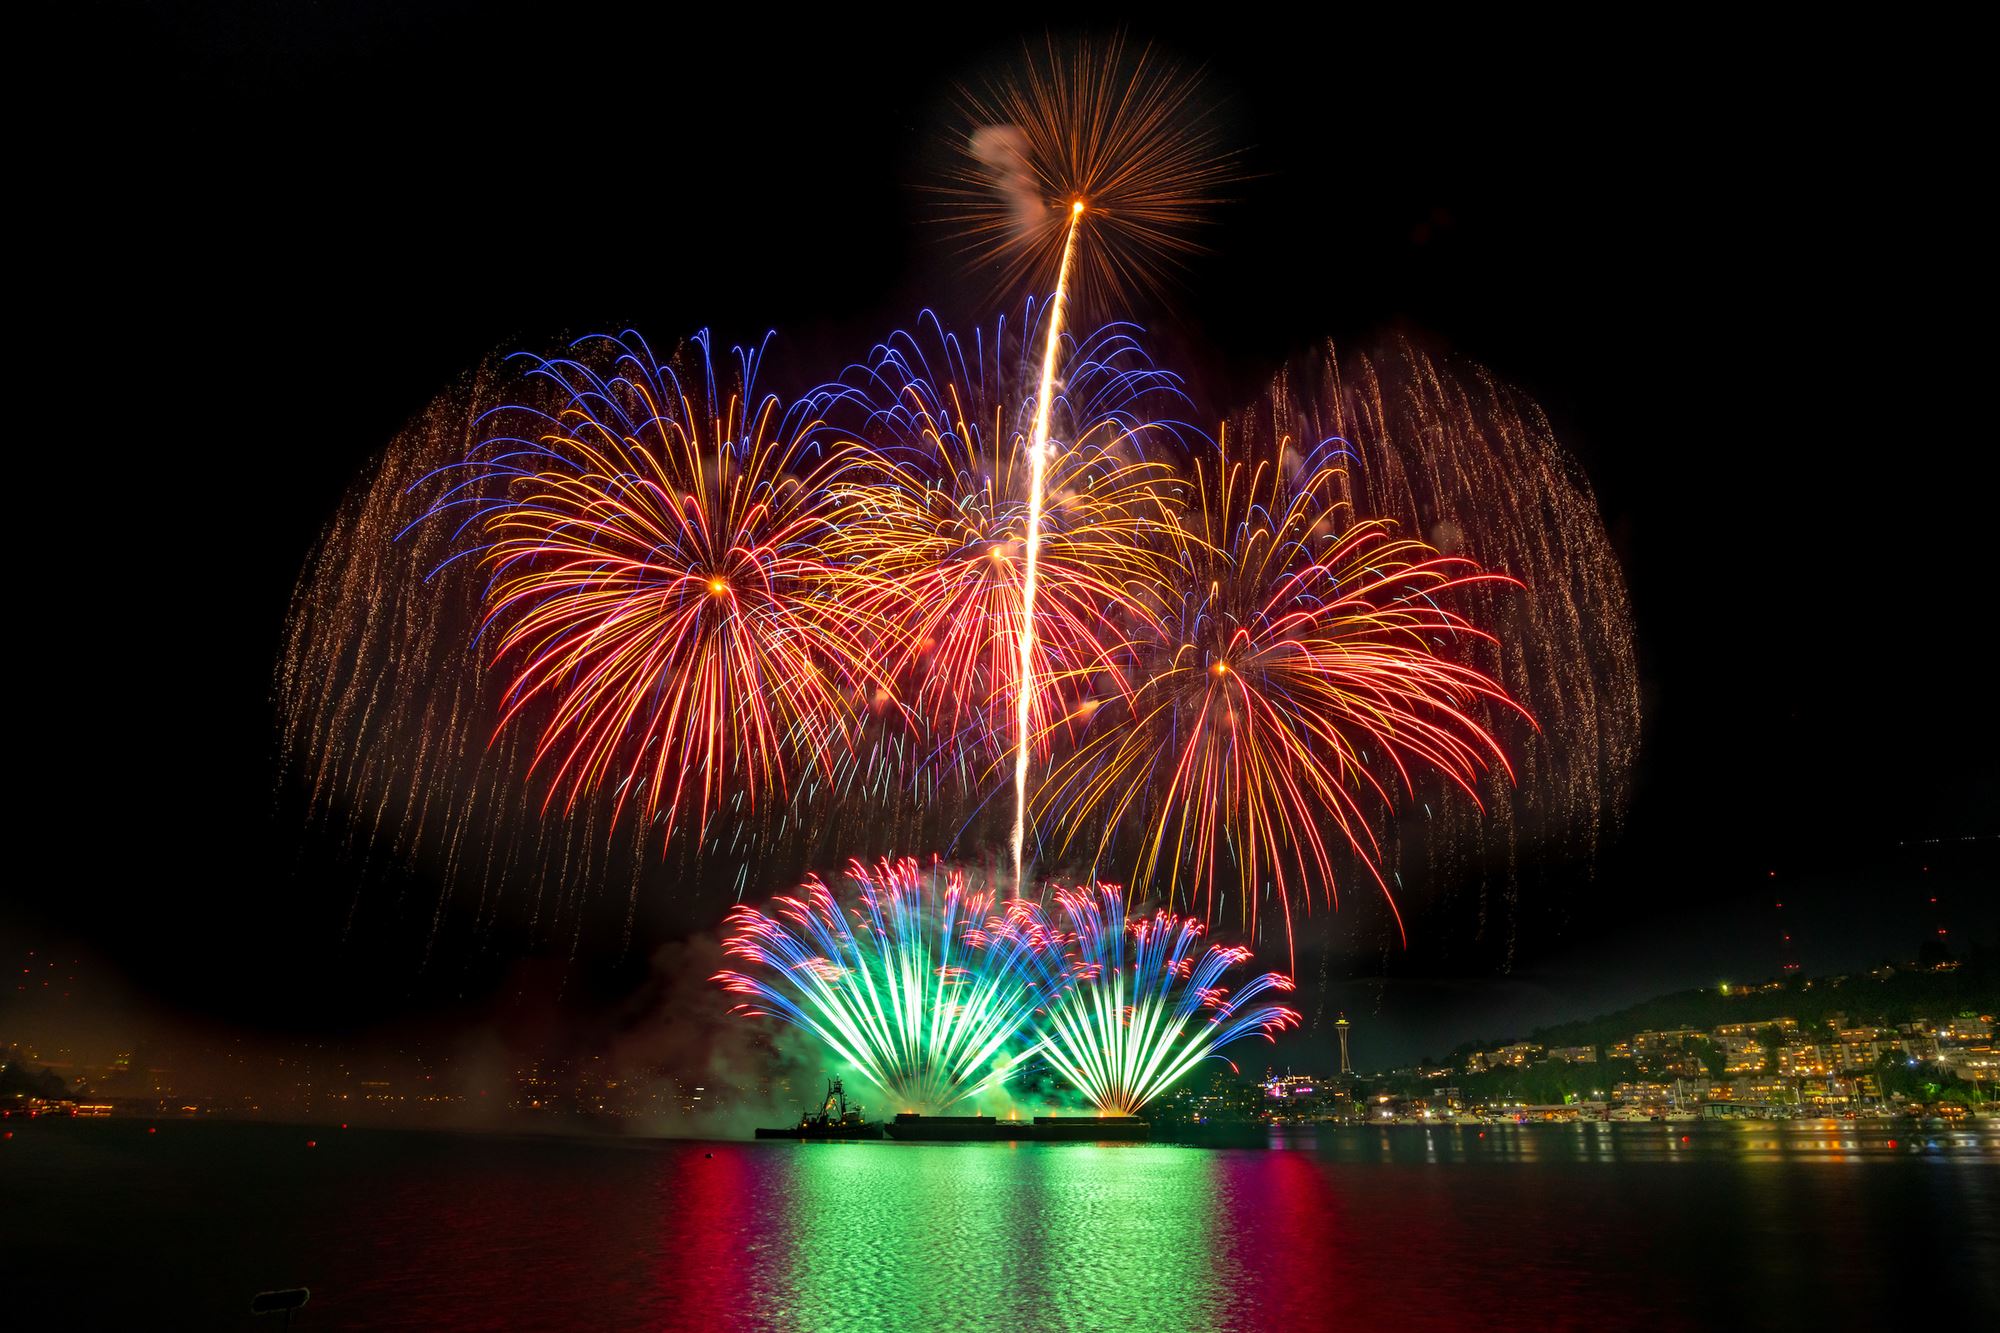 The fireworks show illuminates South Lake Union in Seattle. Colorful fireworks explode above the lake at night.